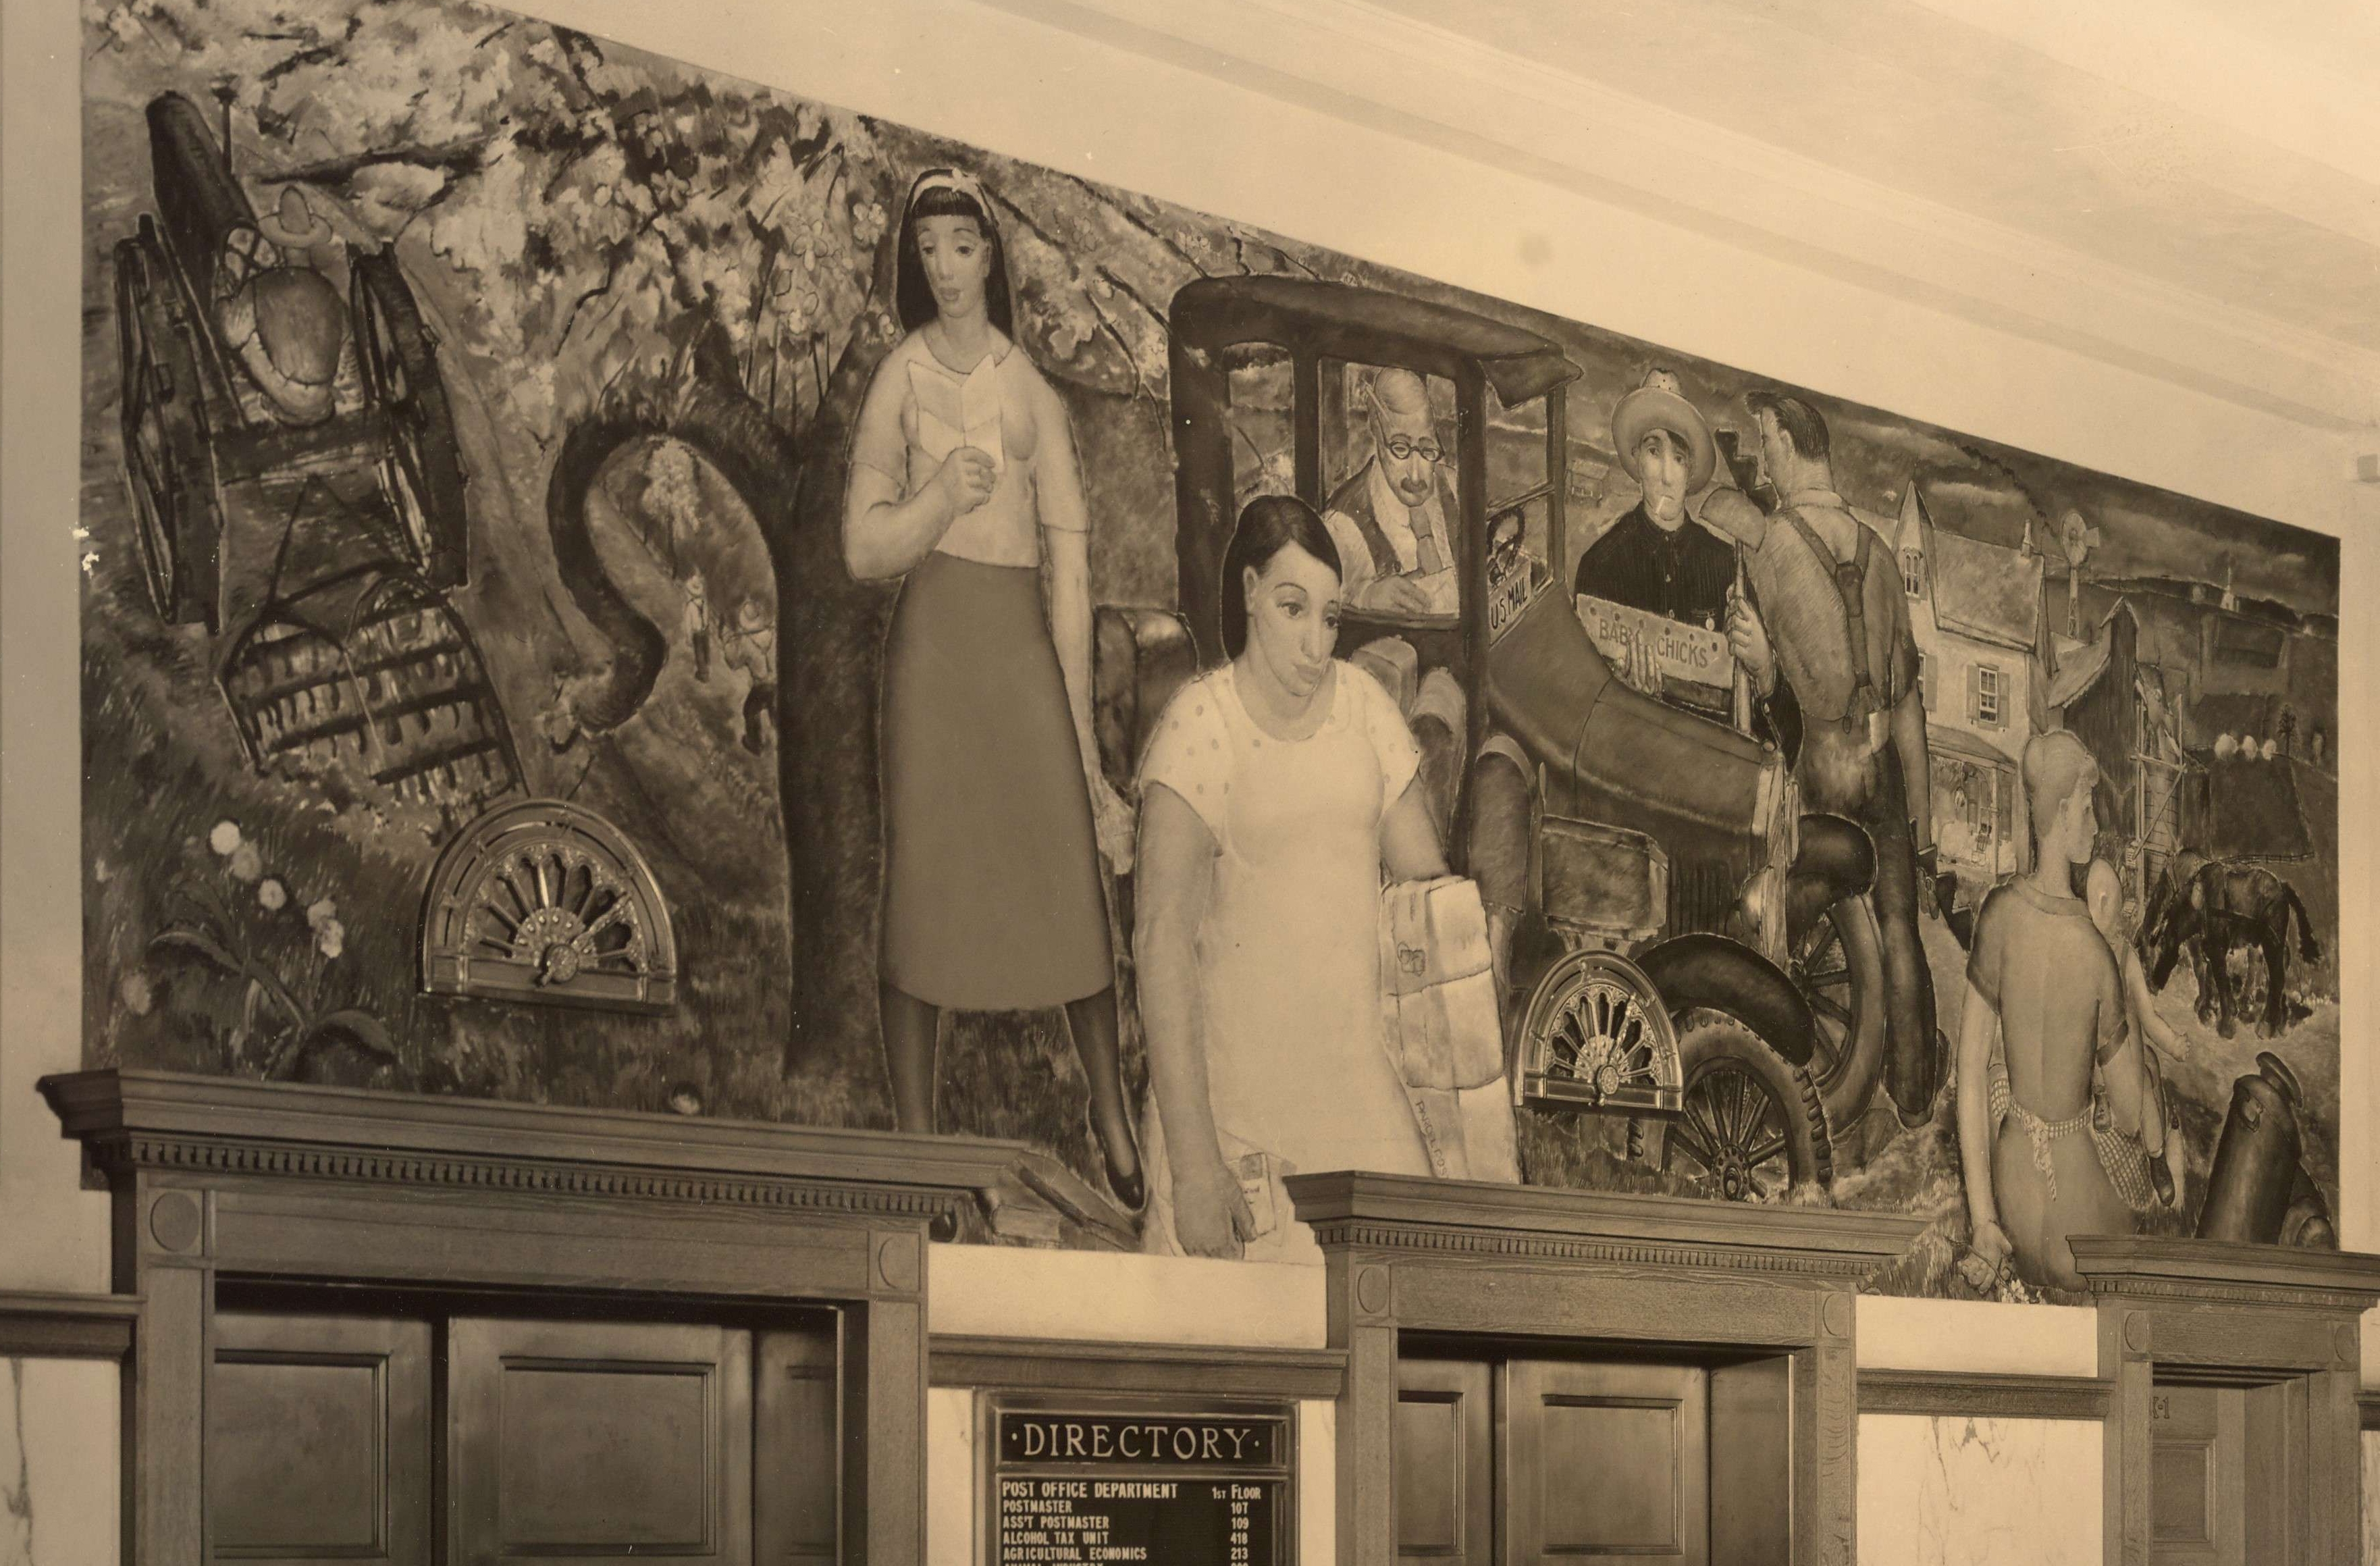 "Rural Delivery" and "Battle of Trenton," Trenton, NJ Post Office Murals by Charles Ward